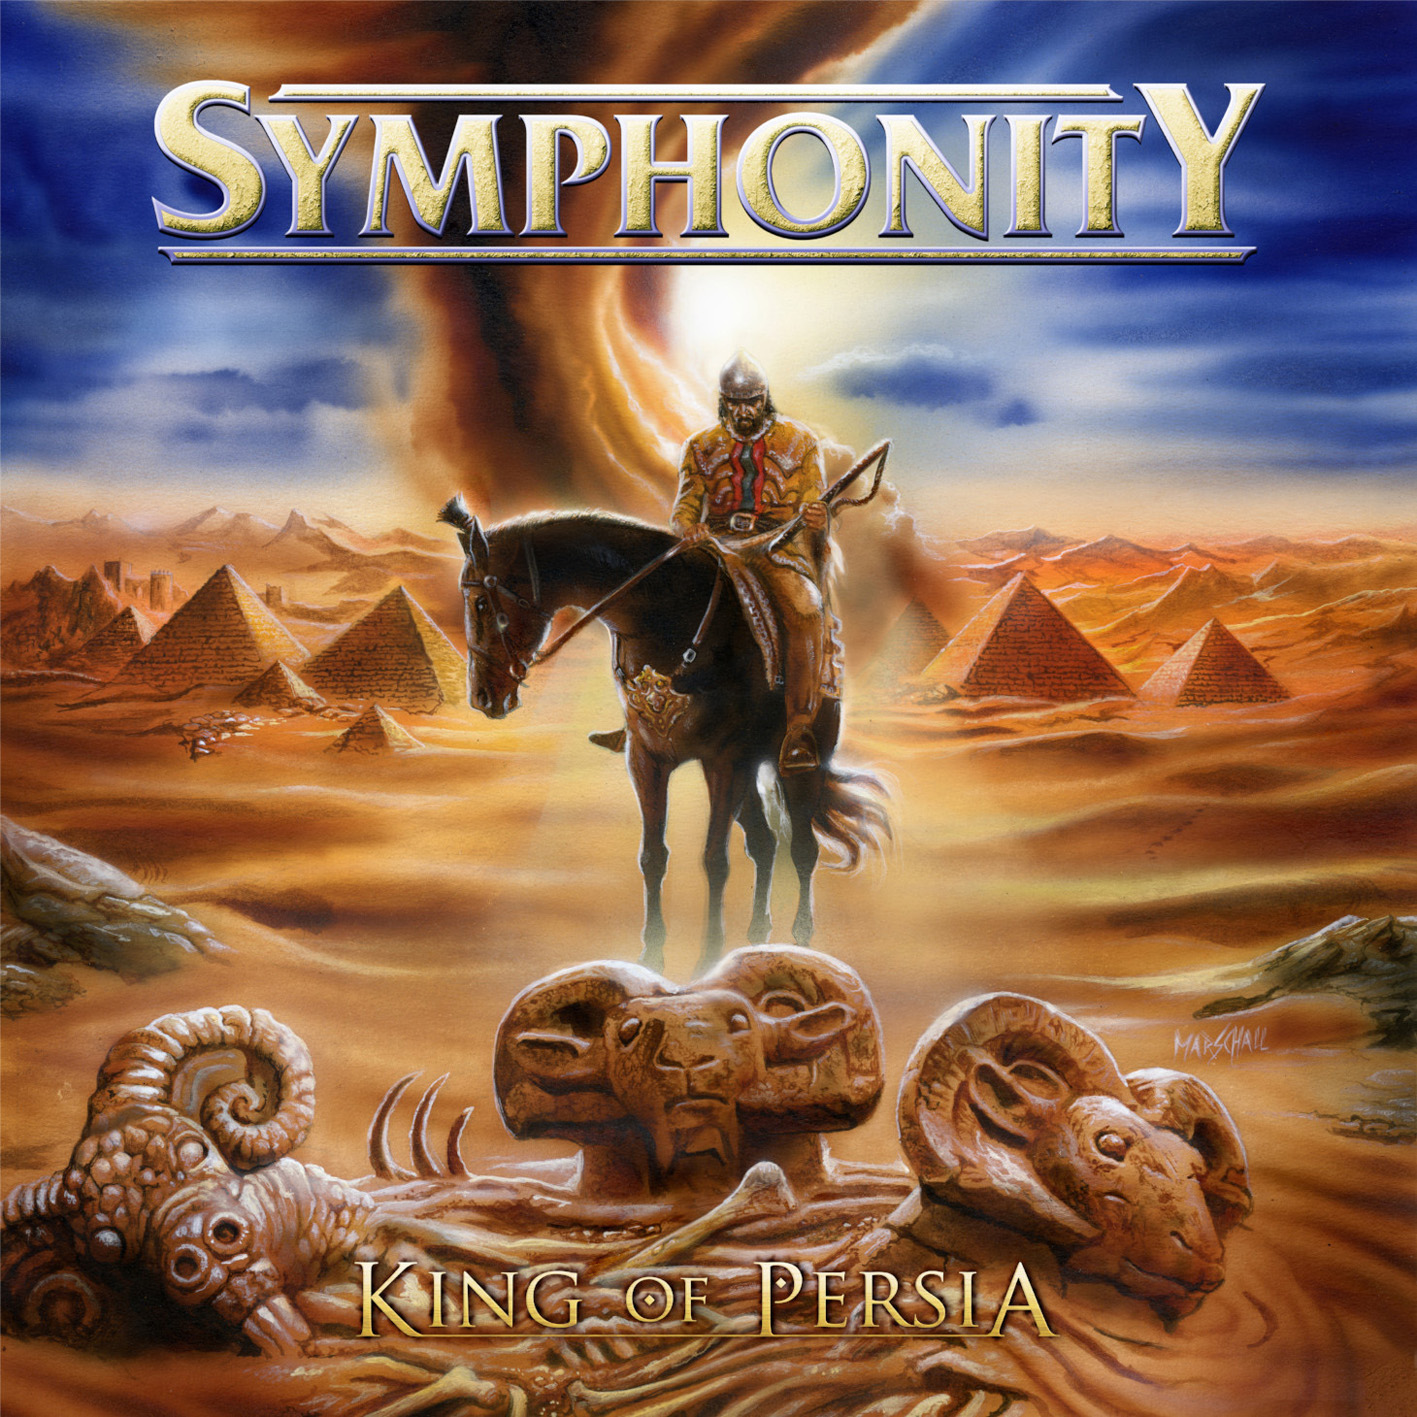 Symphonity – King of Persia